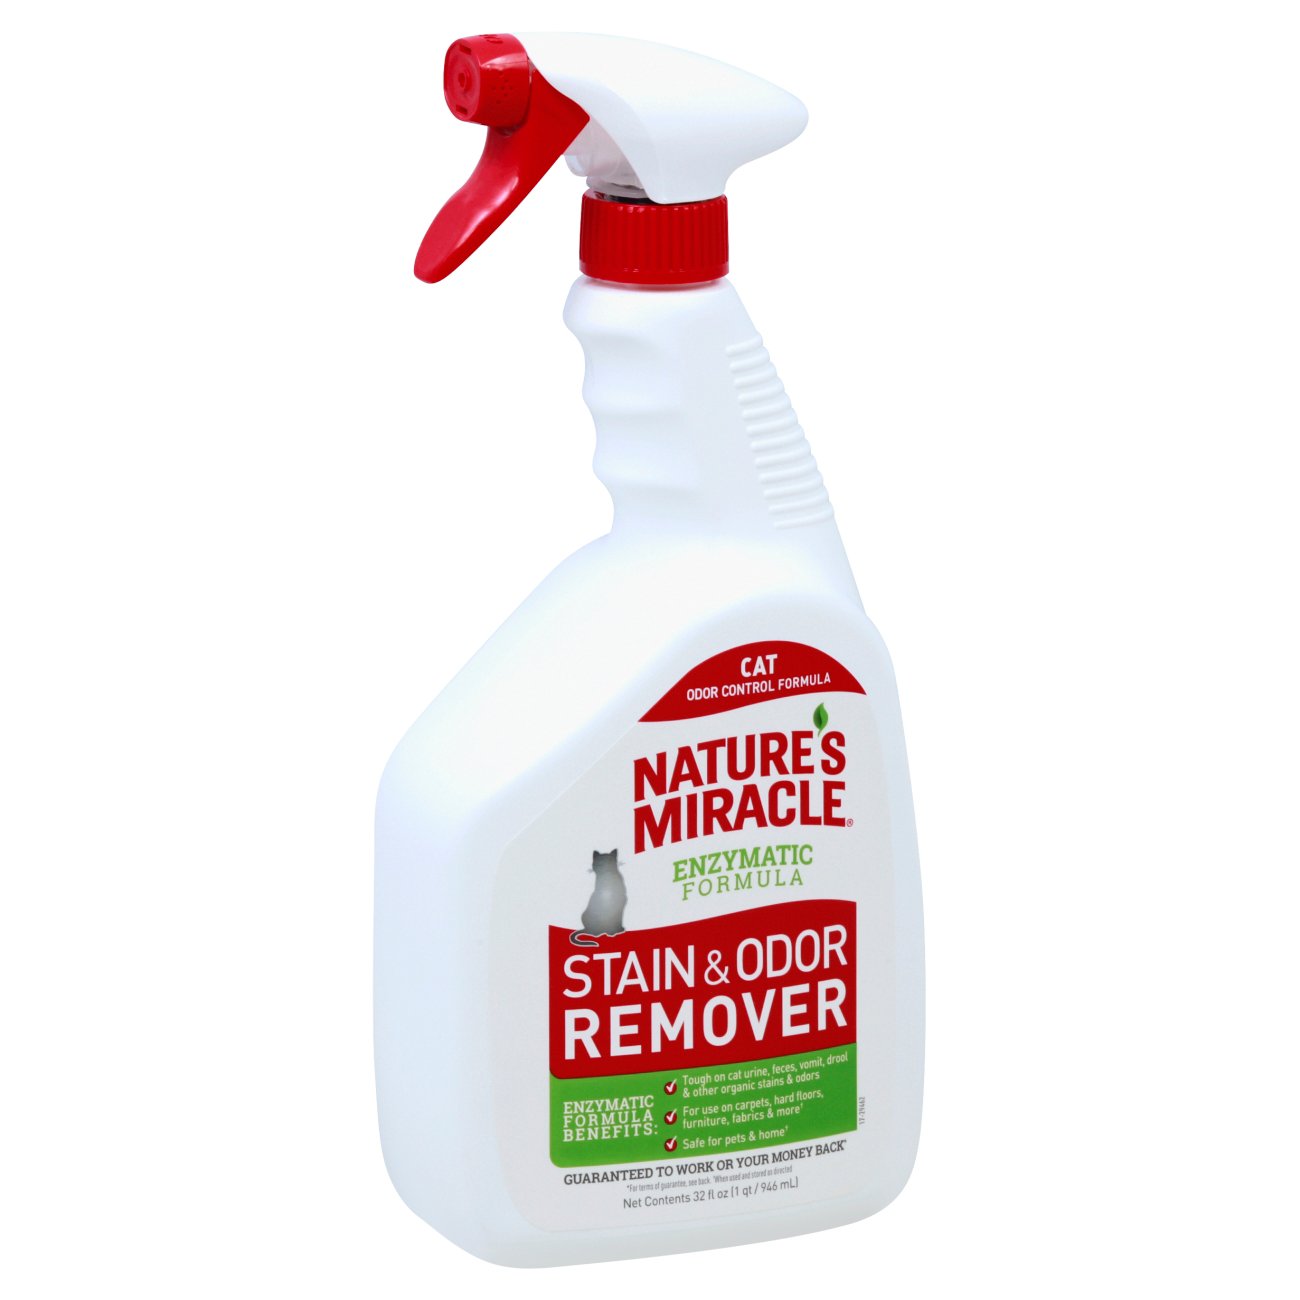 Miracle Cat Stain And Odor Remover, How To Remove Cat Urine Smell From Leather Bag